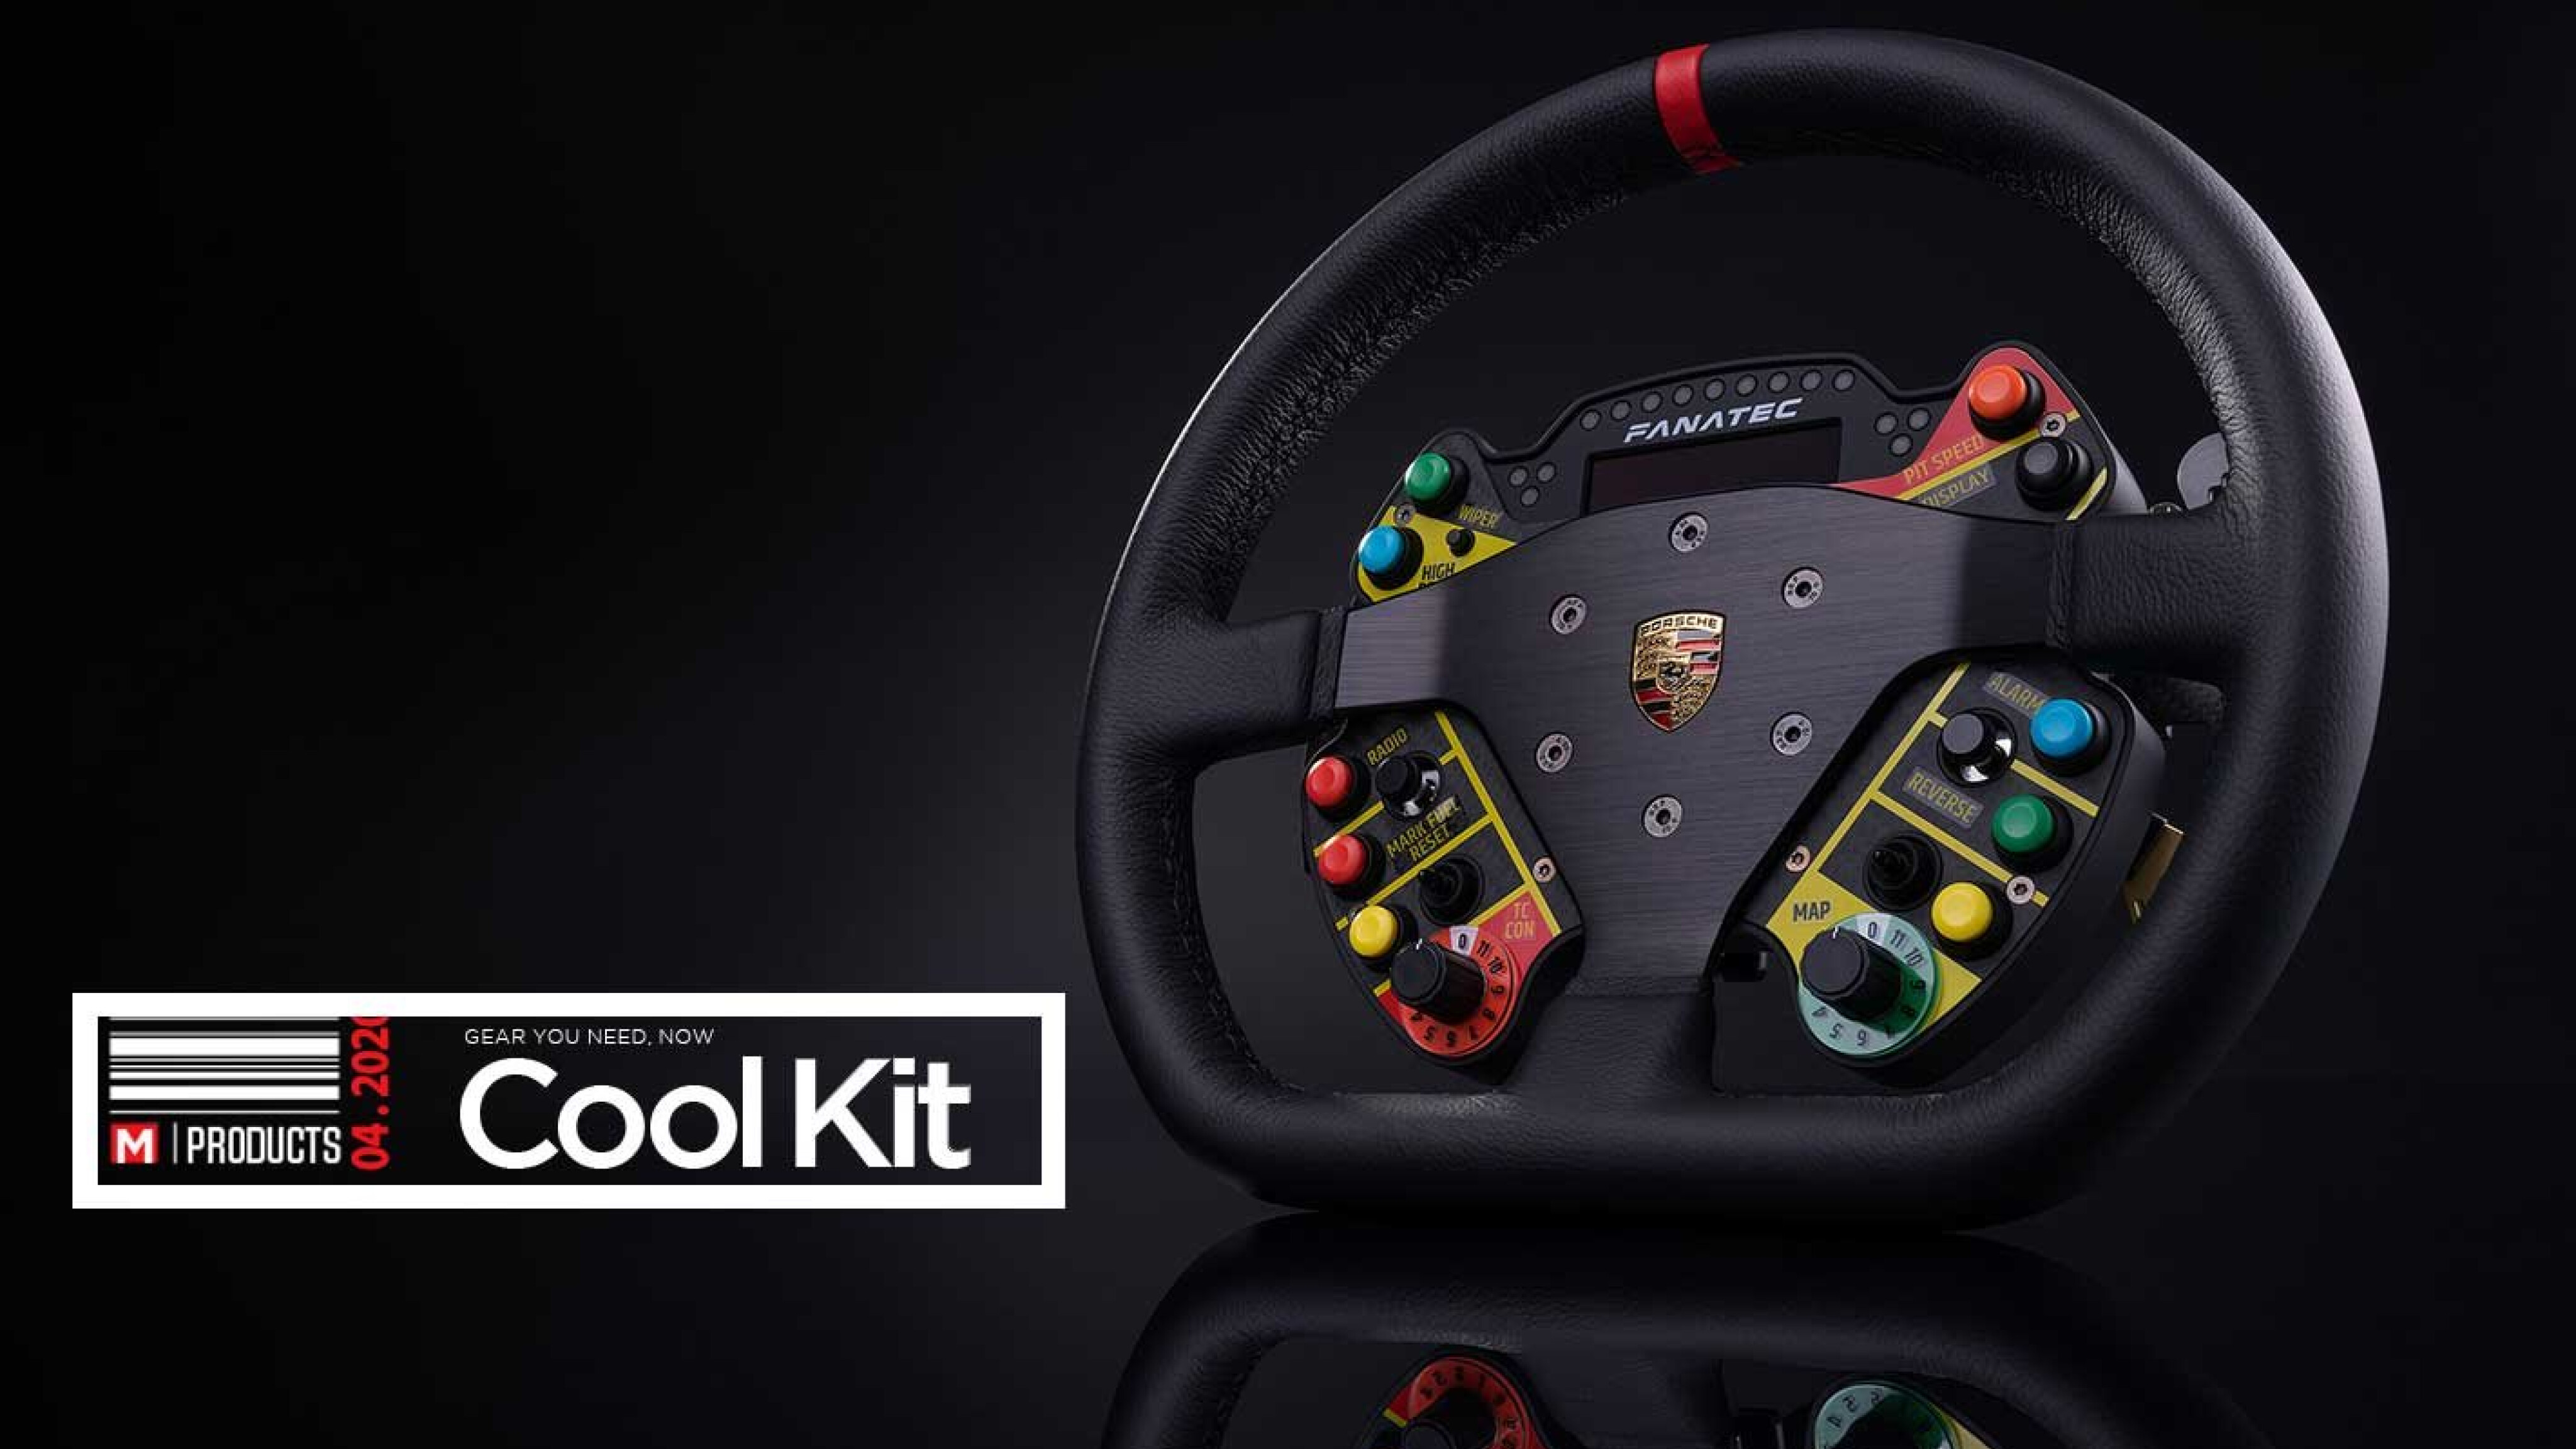 Porsche will sell you a sim controller with the GT3 Cup wheel